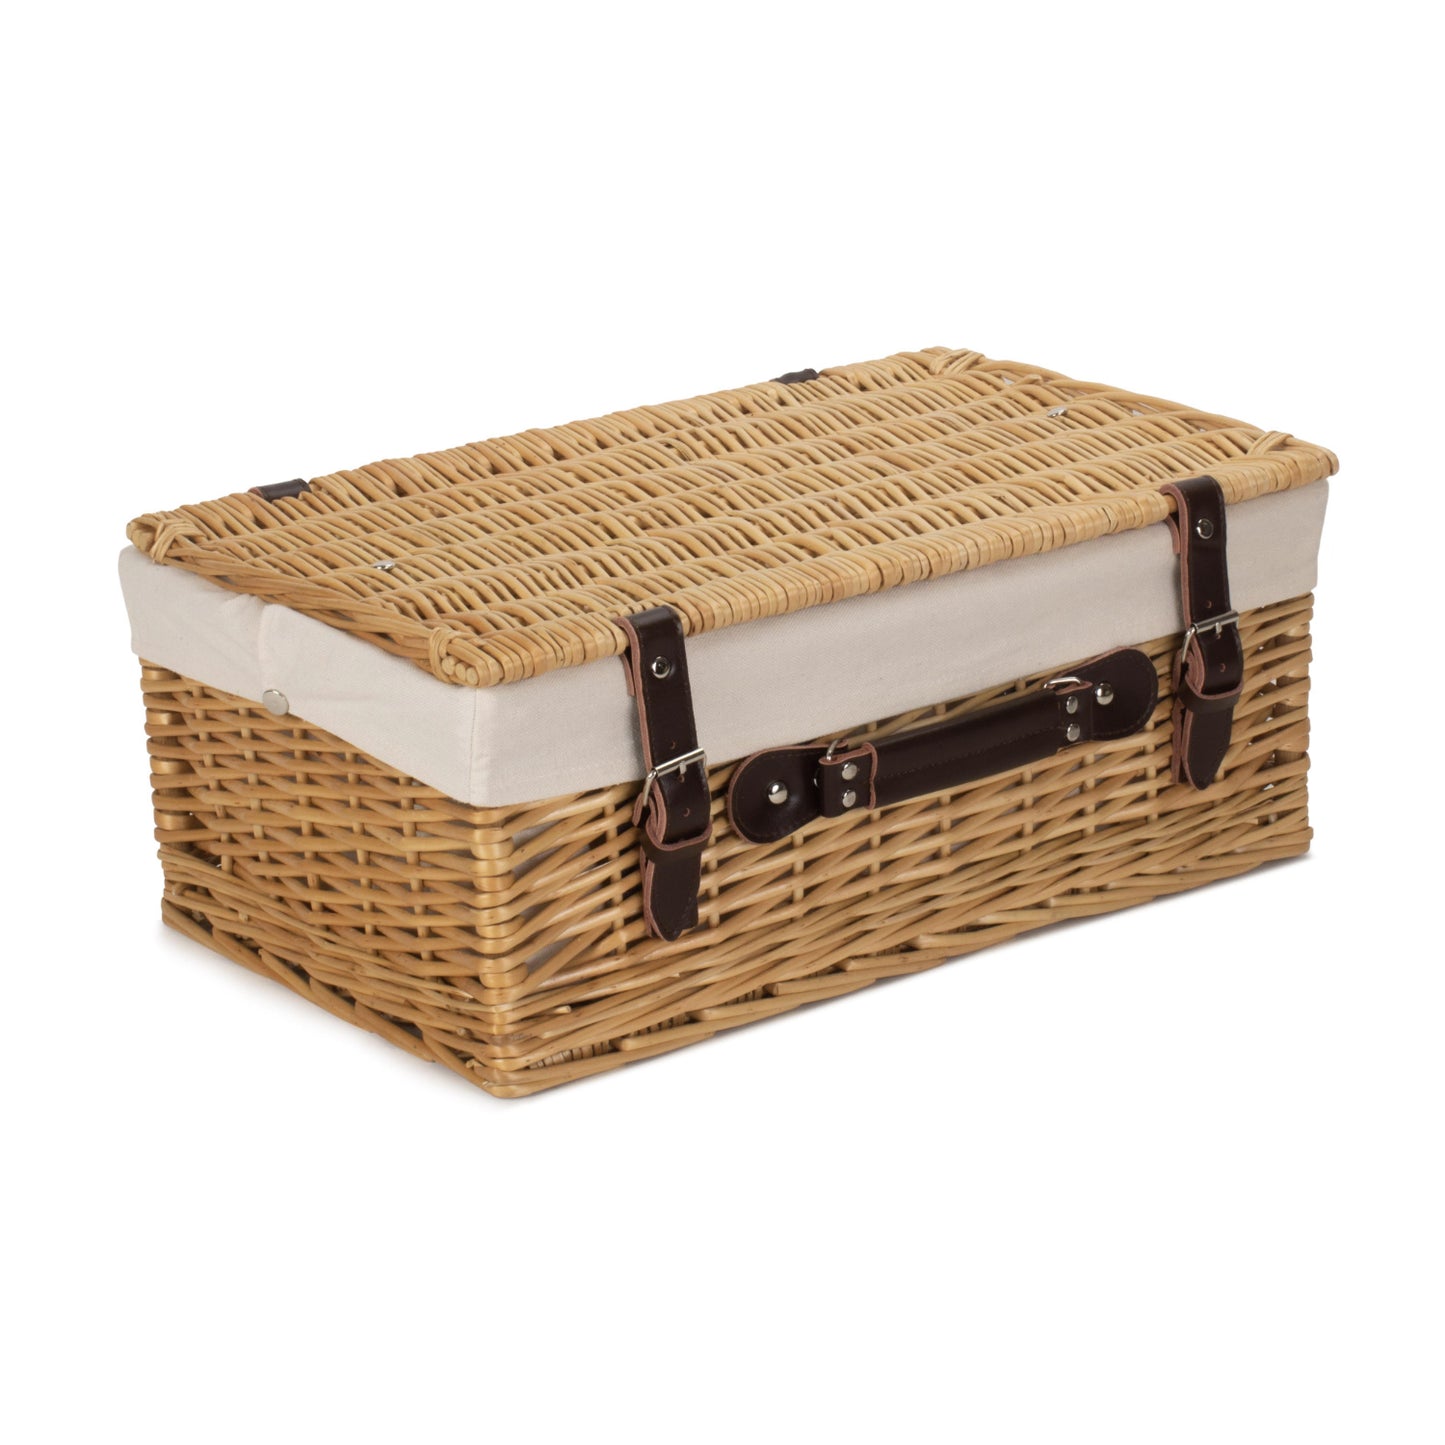 18 Inch Buff Hamper With White Lining